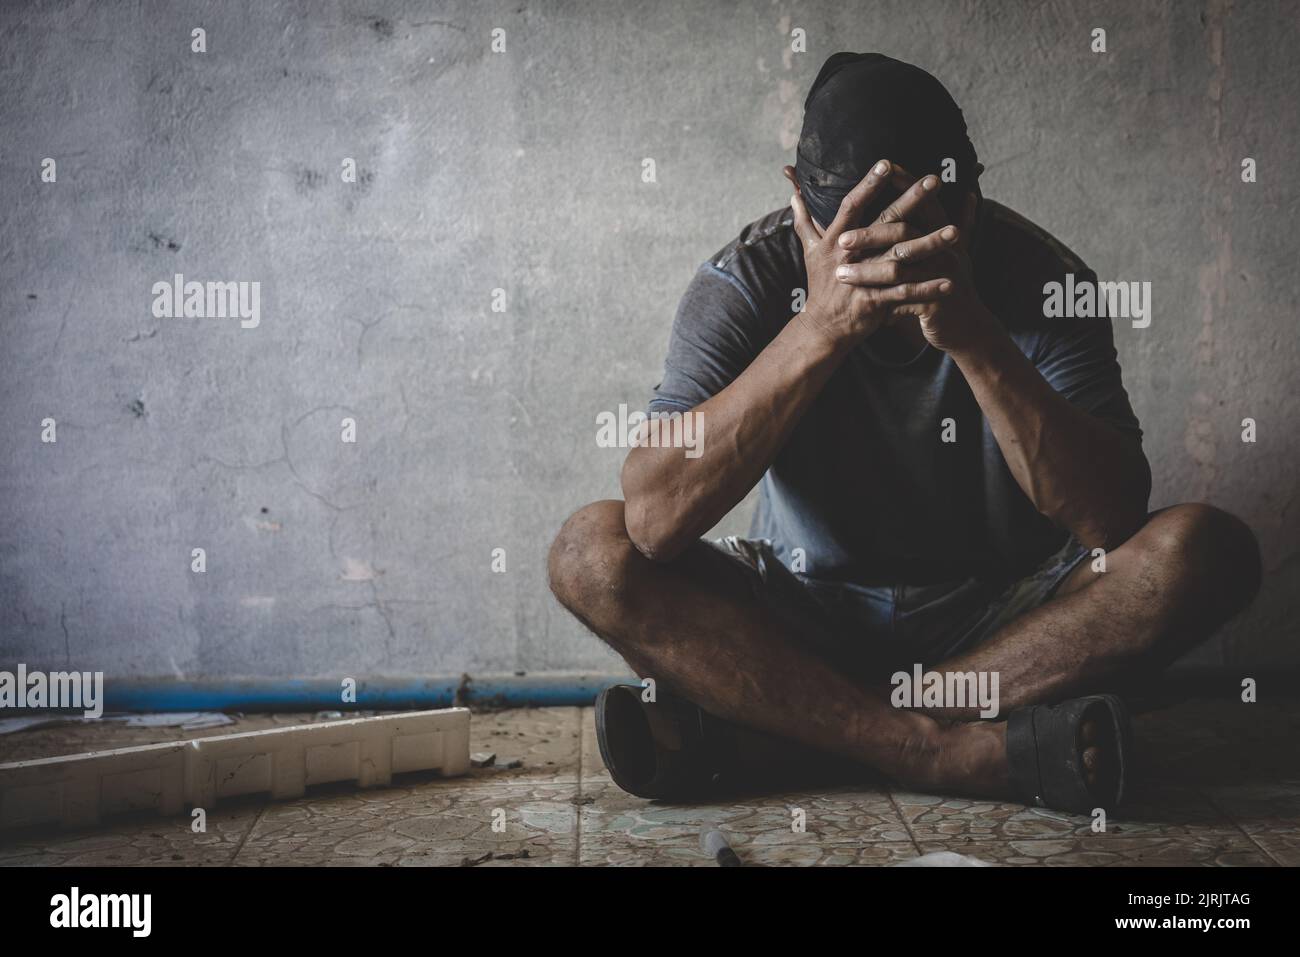 Depressed man sitting in abandoned building. Sad man crying. Drama. Lonely and unhappy concept, drug addict. Stock Photo